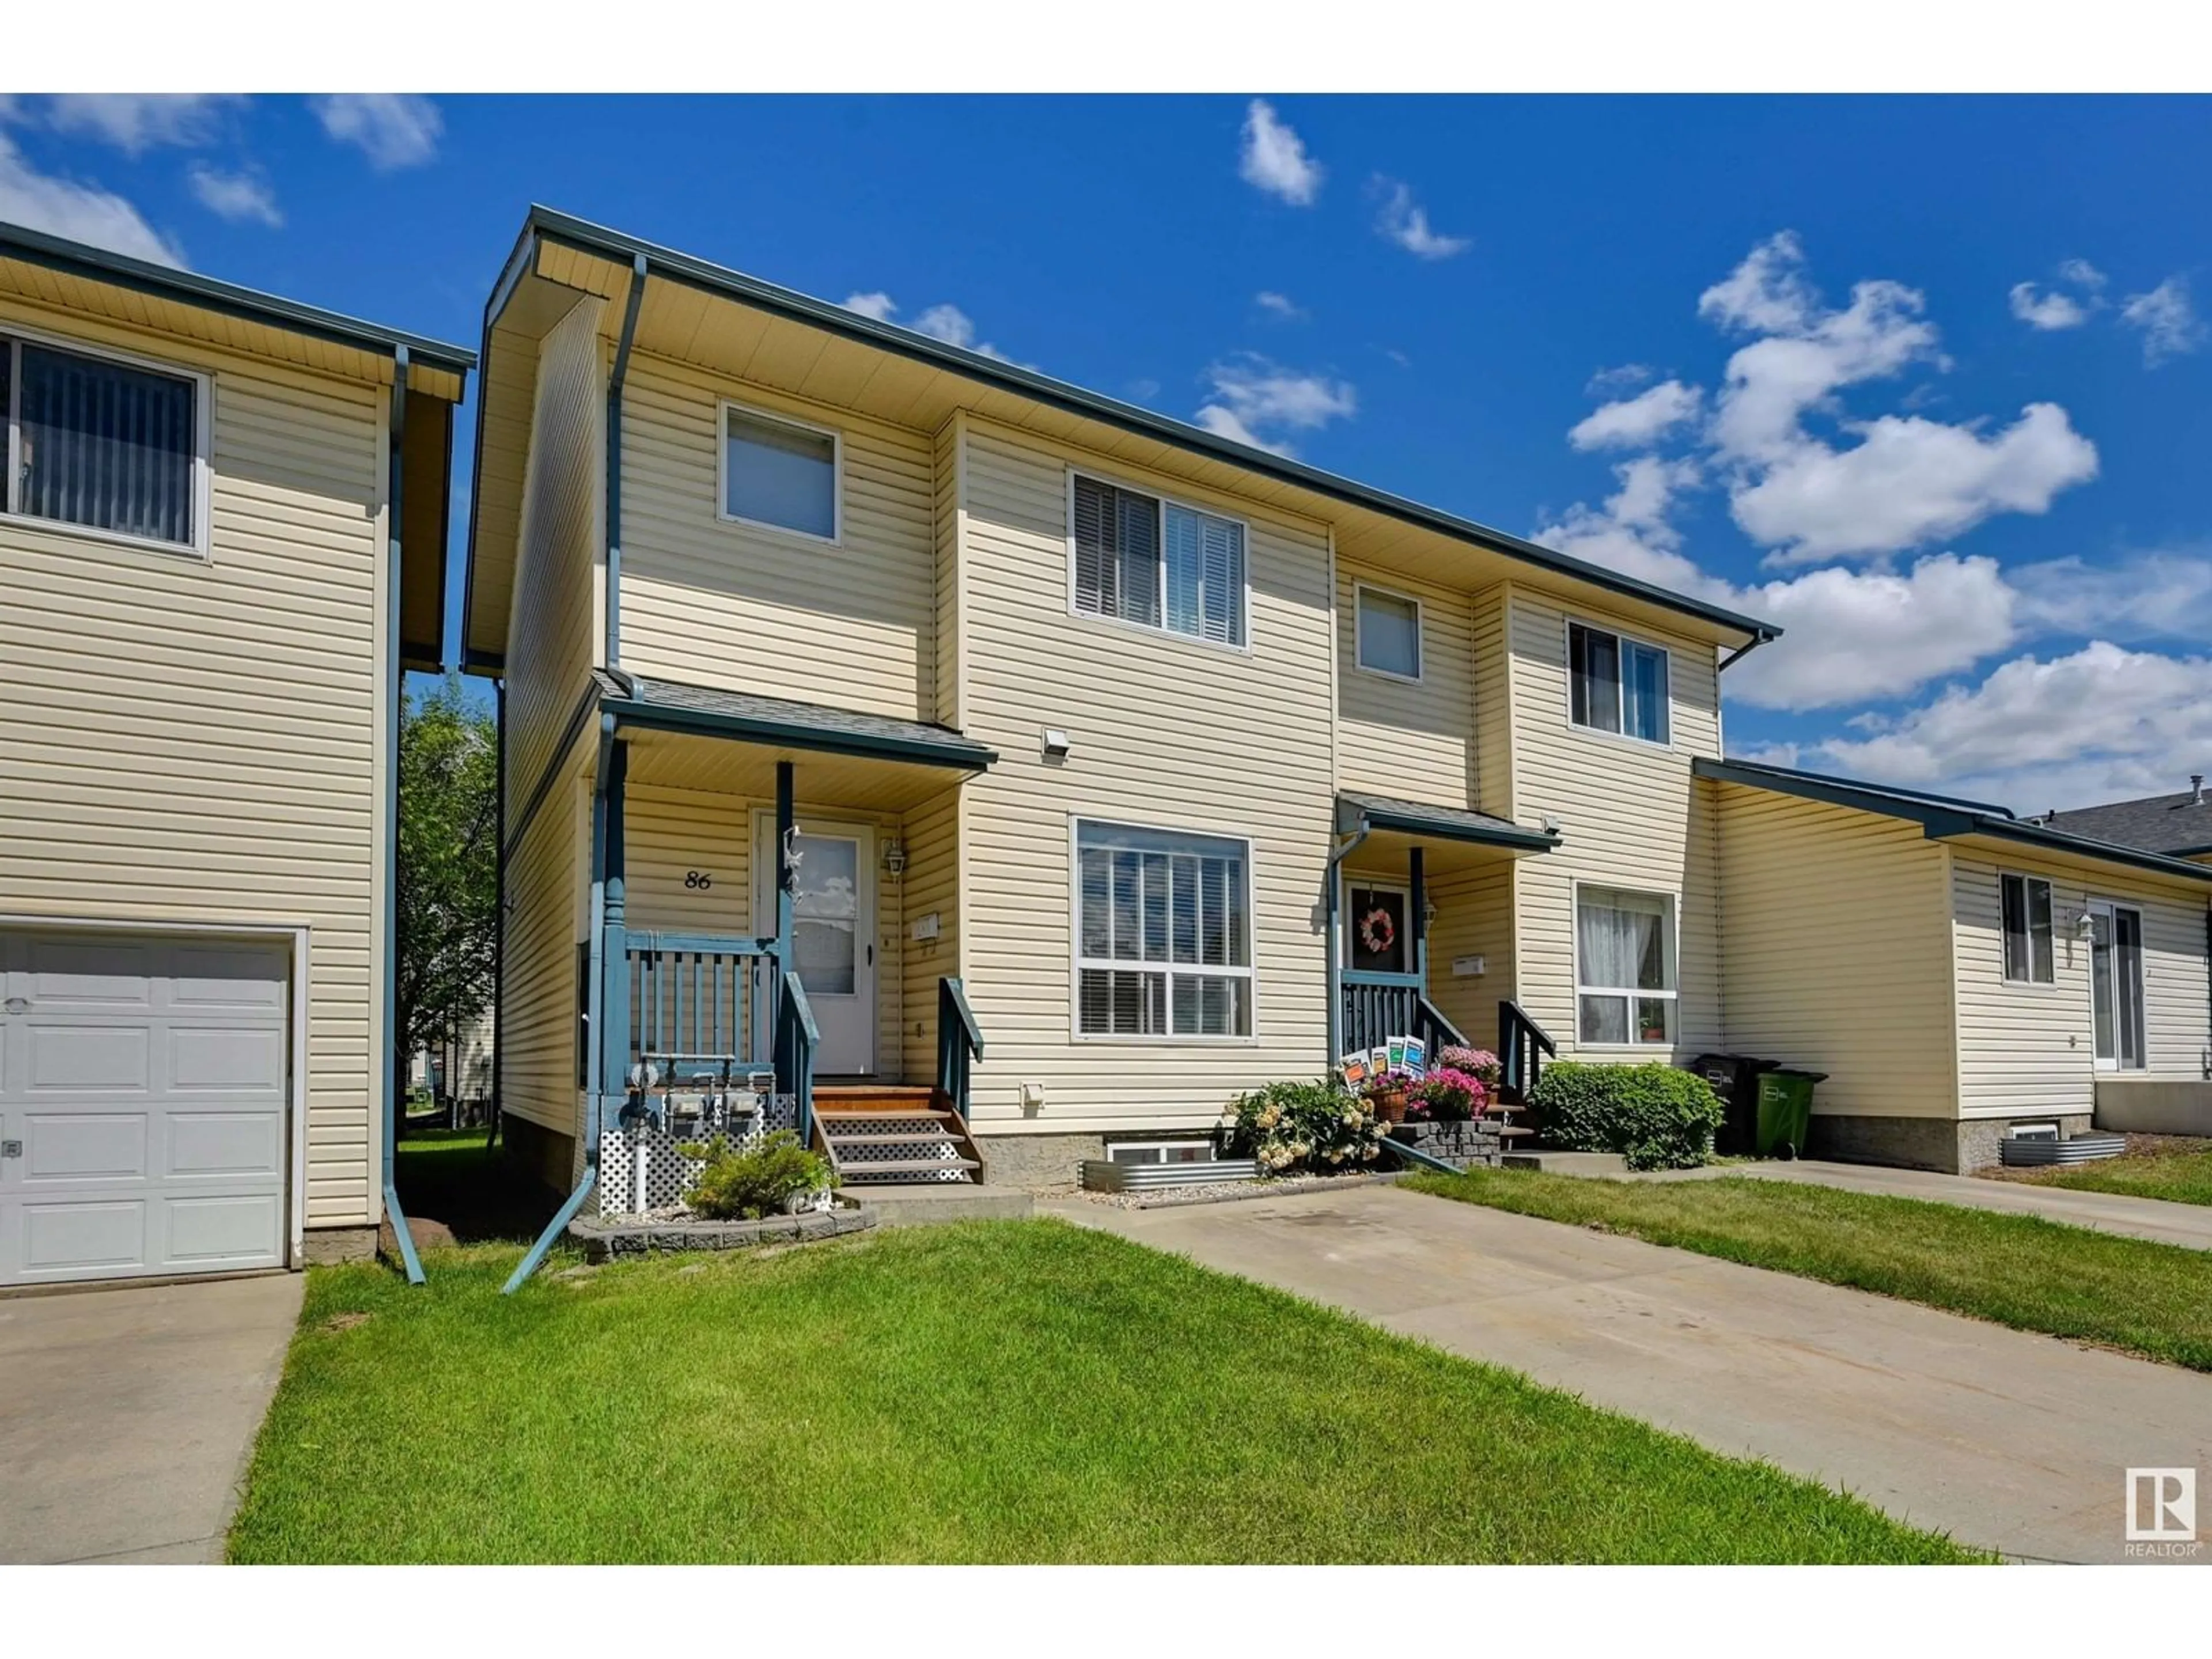 A pic from exterior of the house or condo for #86 10909 106 ST NW, Edmonton Alberta T5H4M7